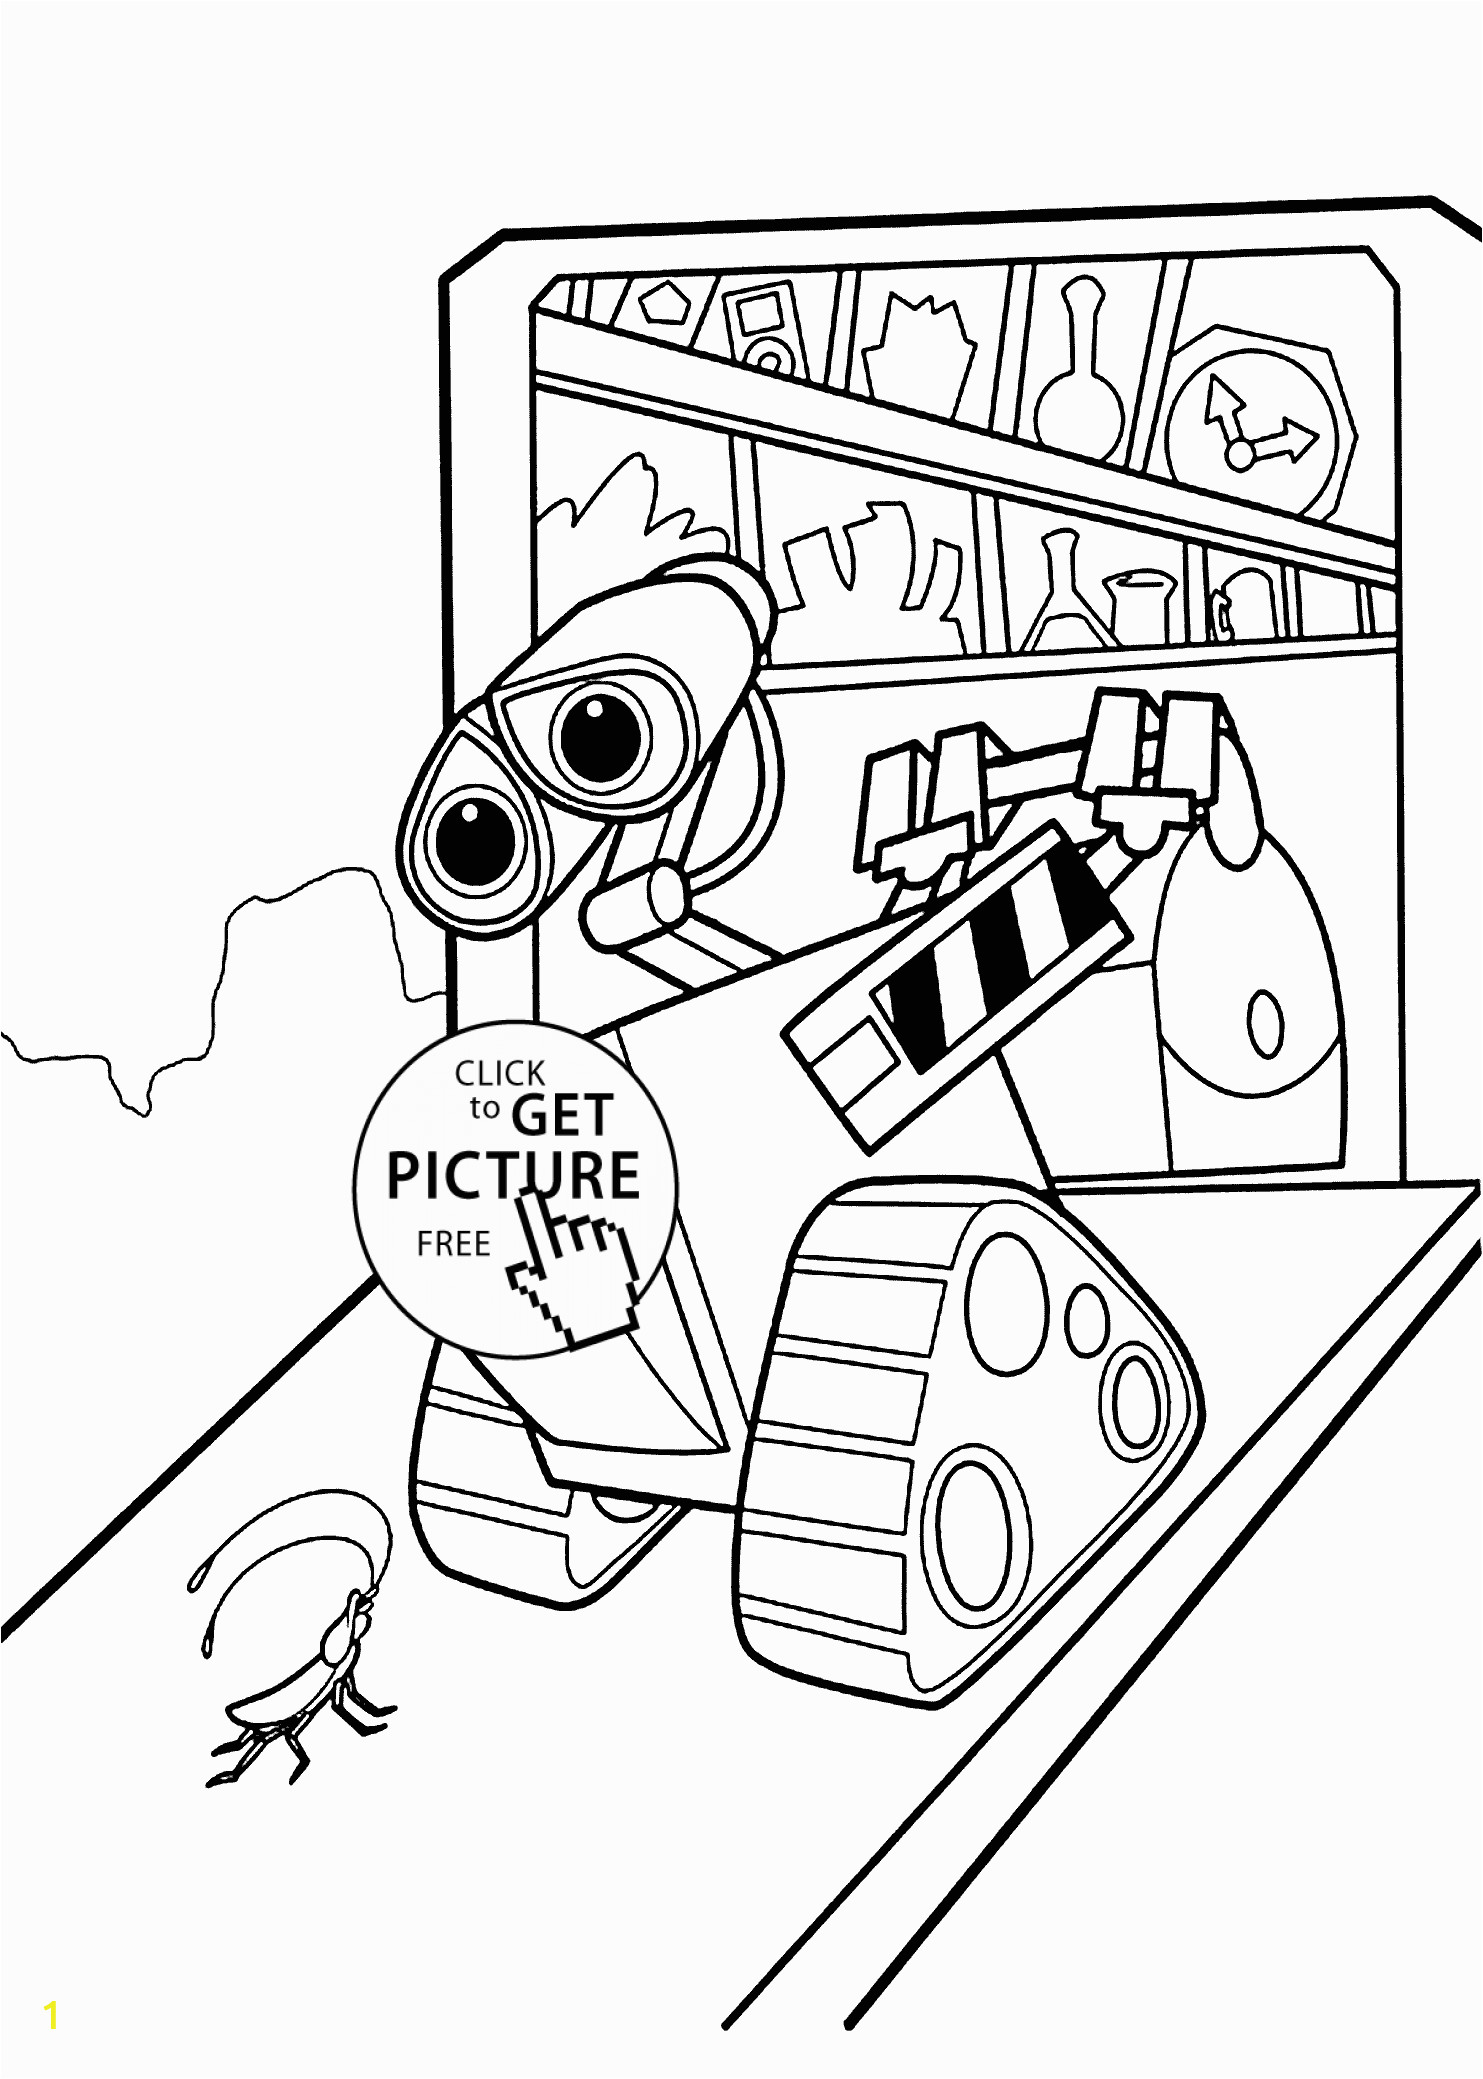 Printable Robot Coloring Pages Wall E Home Coloring Pages for Kids Printable Free